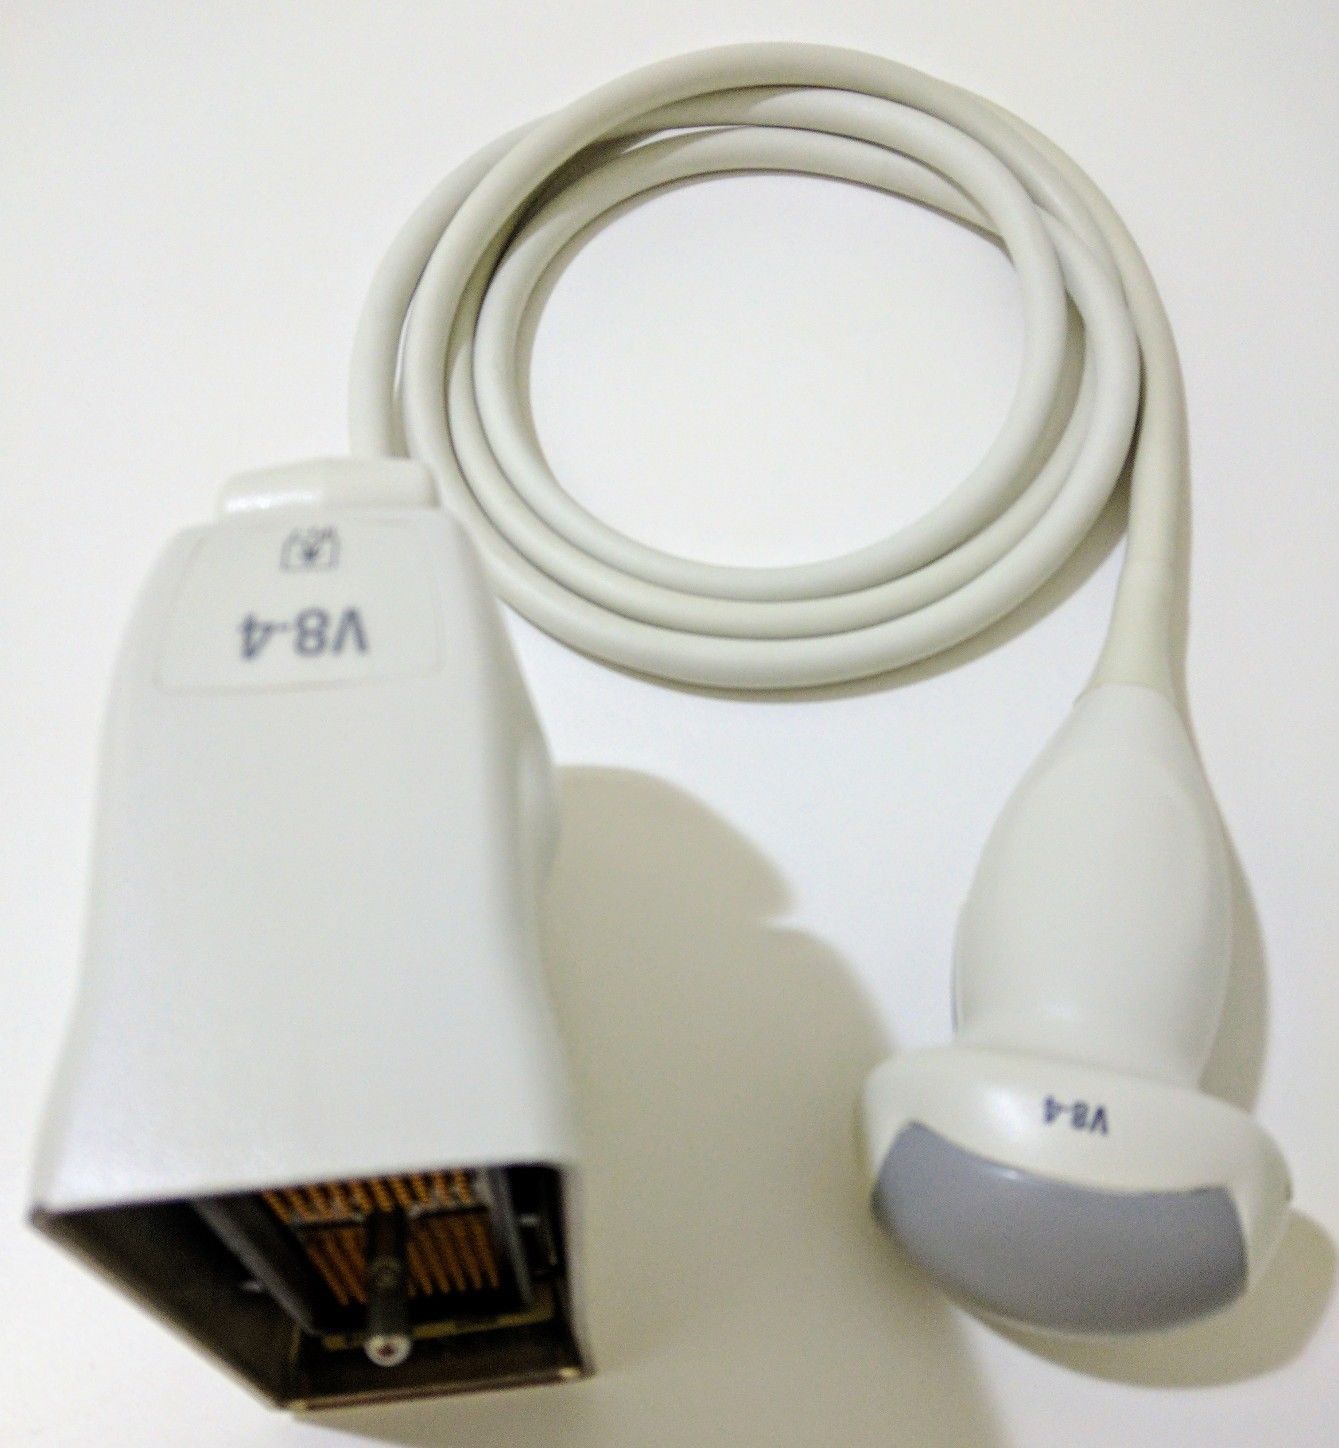 PHILIPS V8-4 3D/4D CONVEX ARRAY TRANSDUCER PROBE FOR HD11 DIAGNOSTIC ULTRASOUND MACHINES FOR SALE